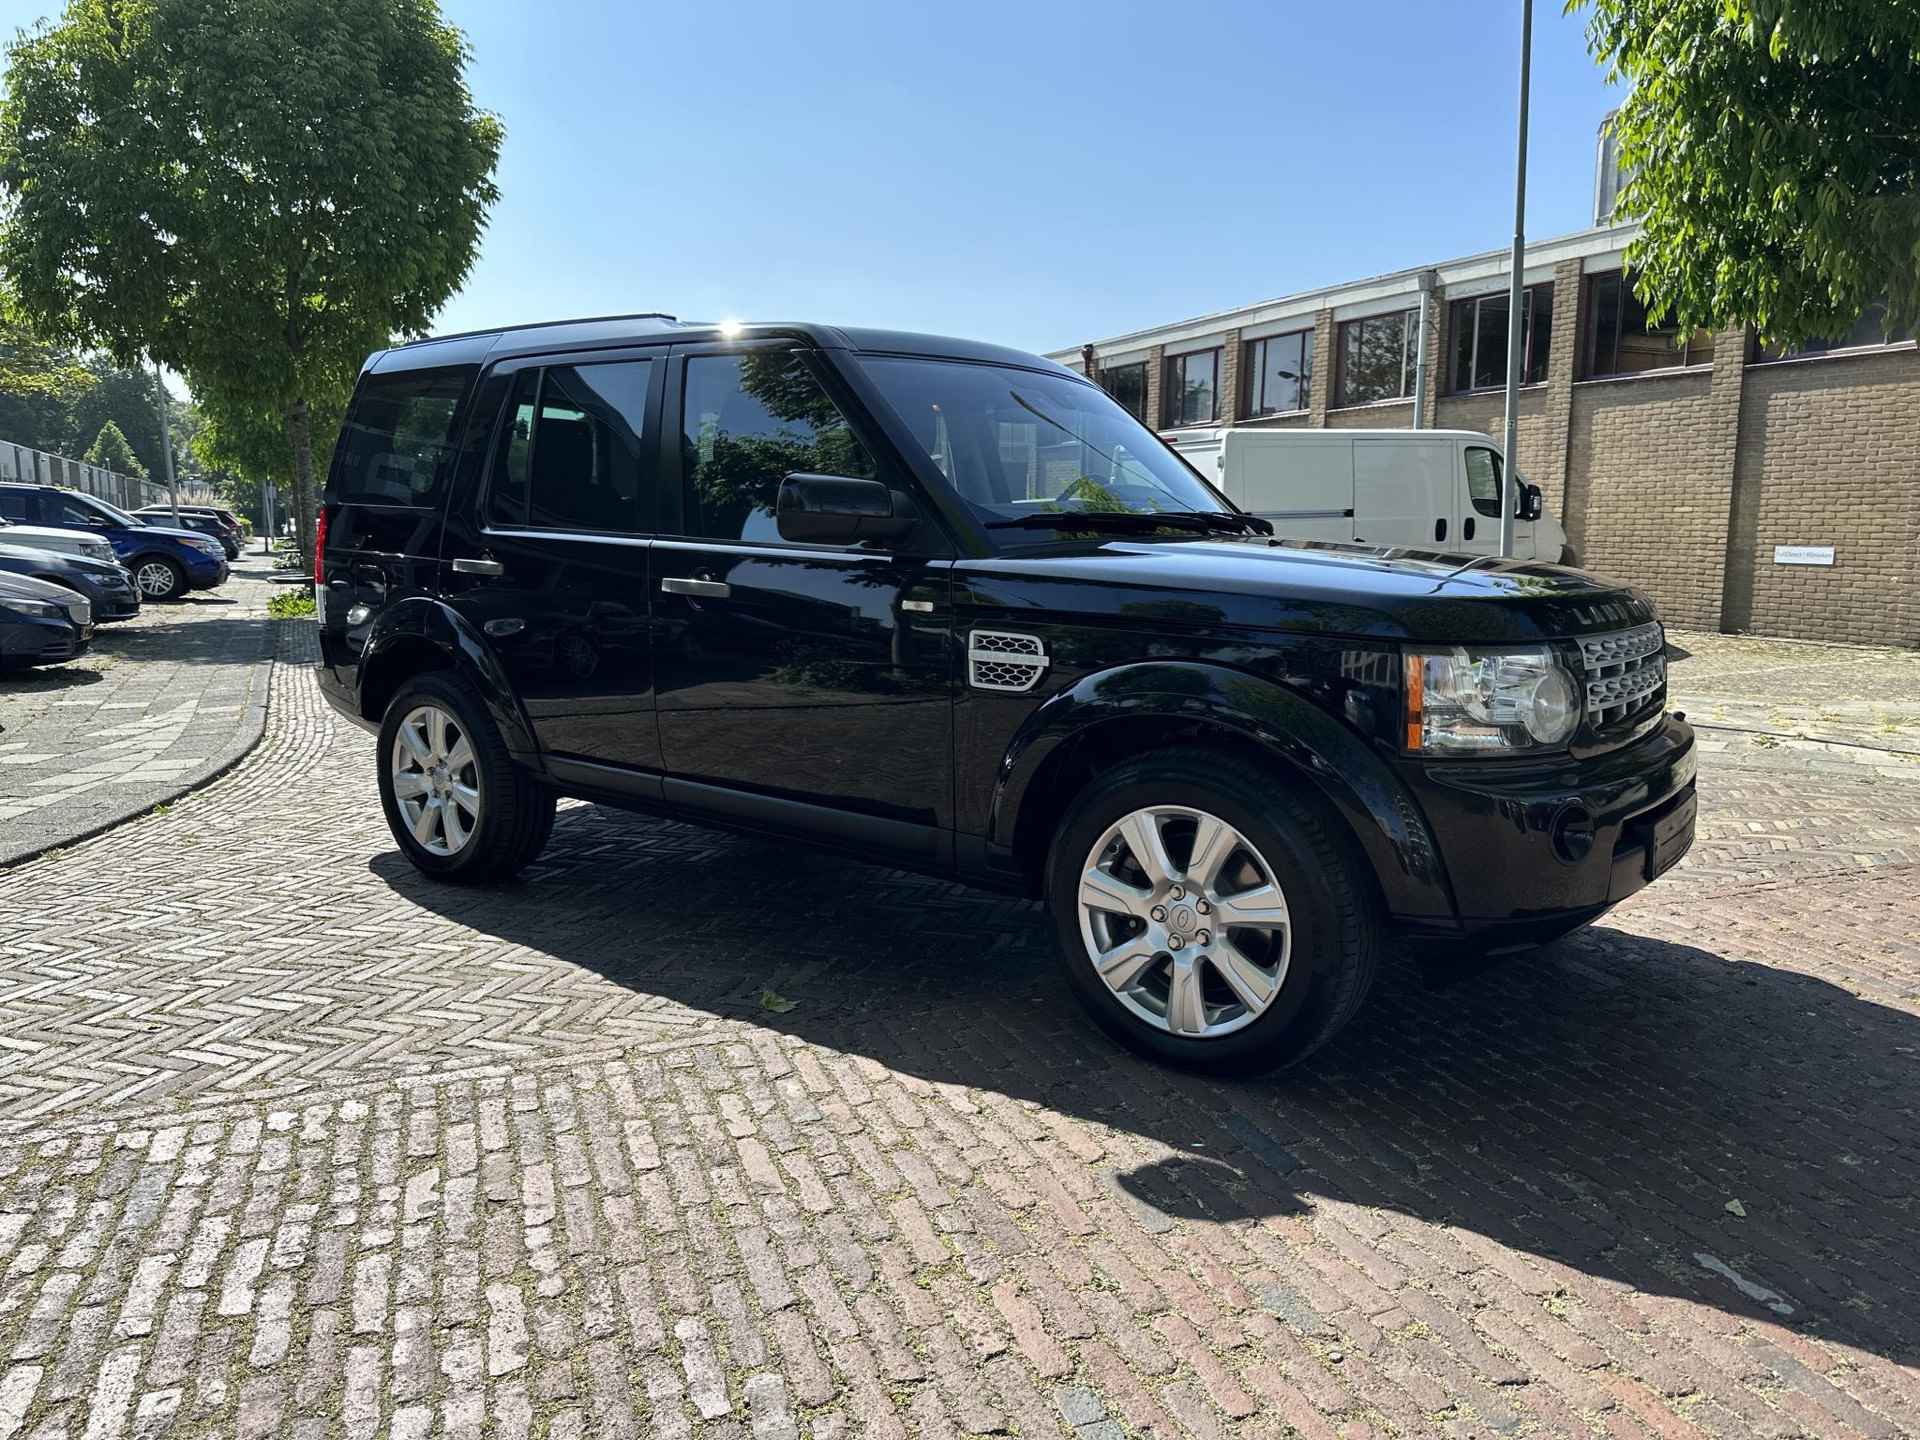 Land Rover Discovery 5.0 V8 HSE 5.0 Hse - 12/16